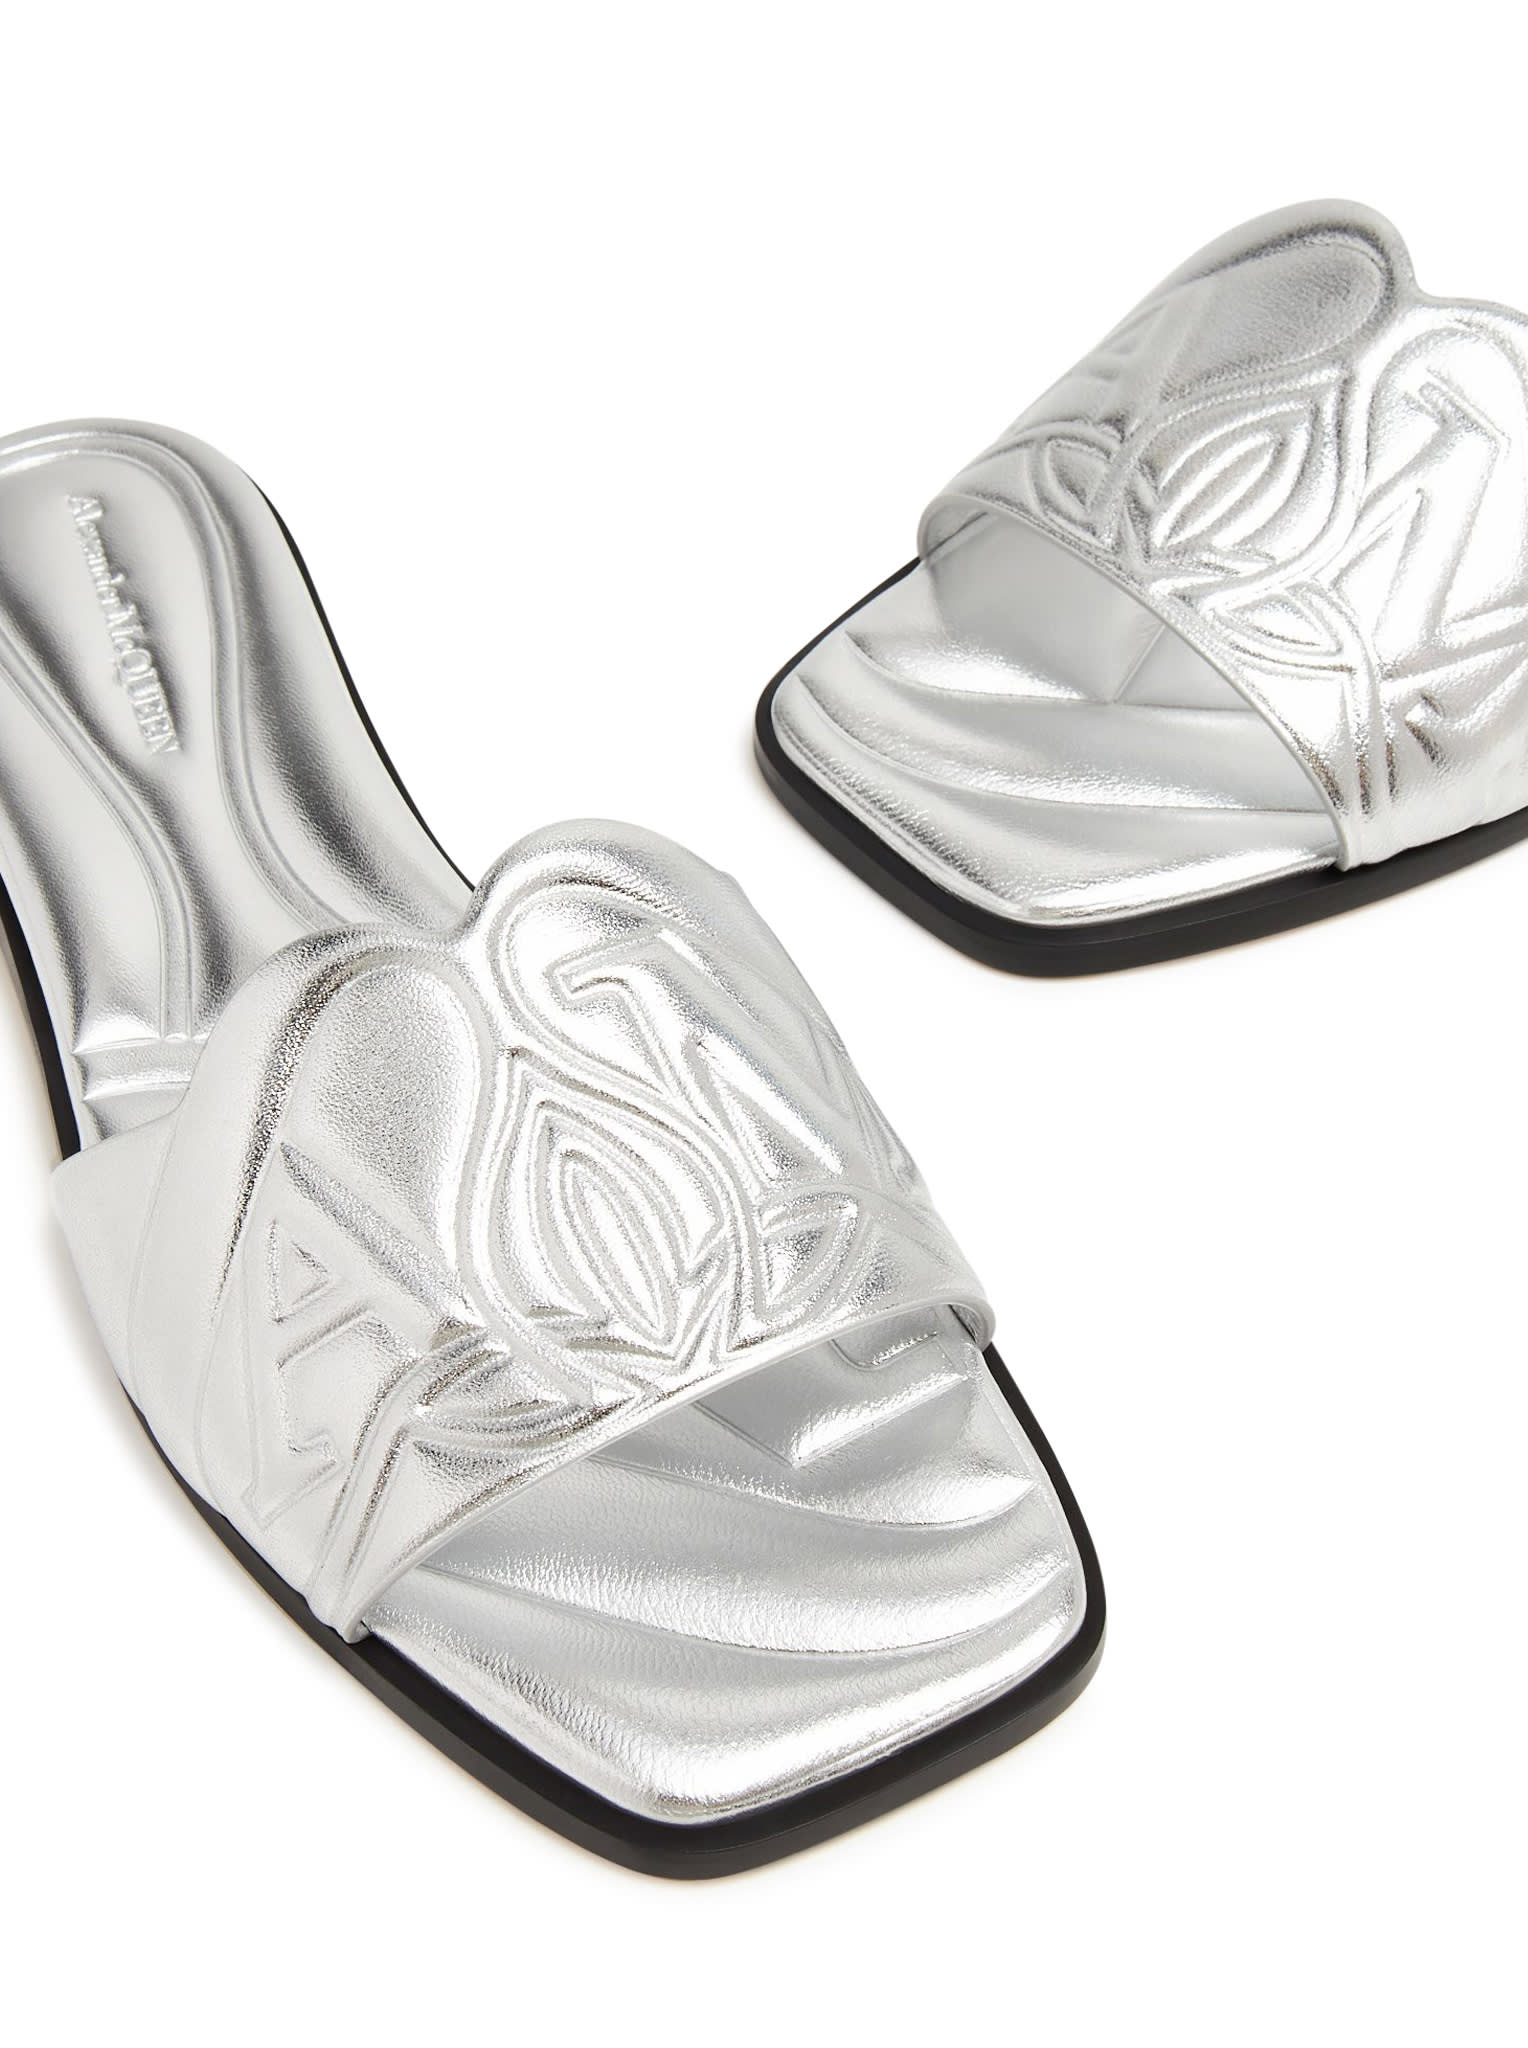 Shop Alexander Mcqueen Sandal Leath S.rubb. Silk Leather/high Frequency In Silver